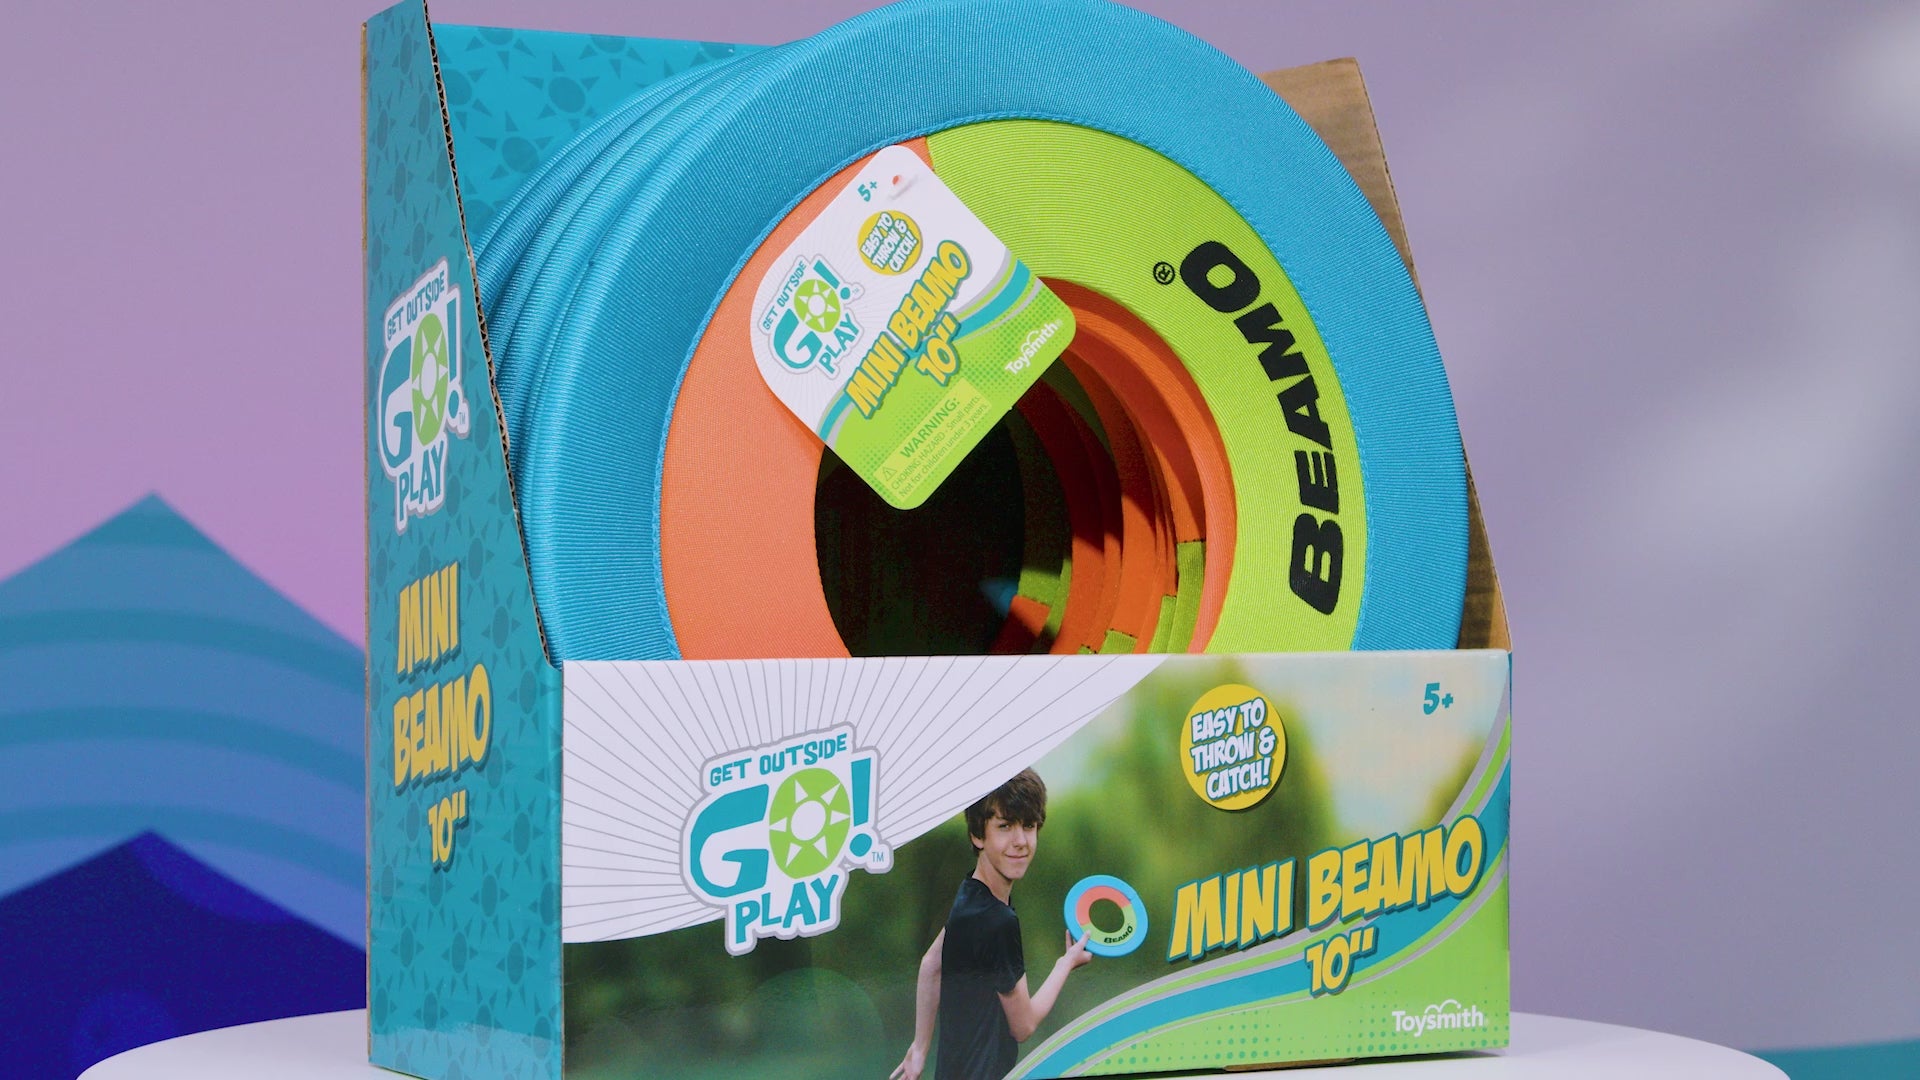 Video of mini Beamo frisbees being displayed and used.